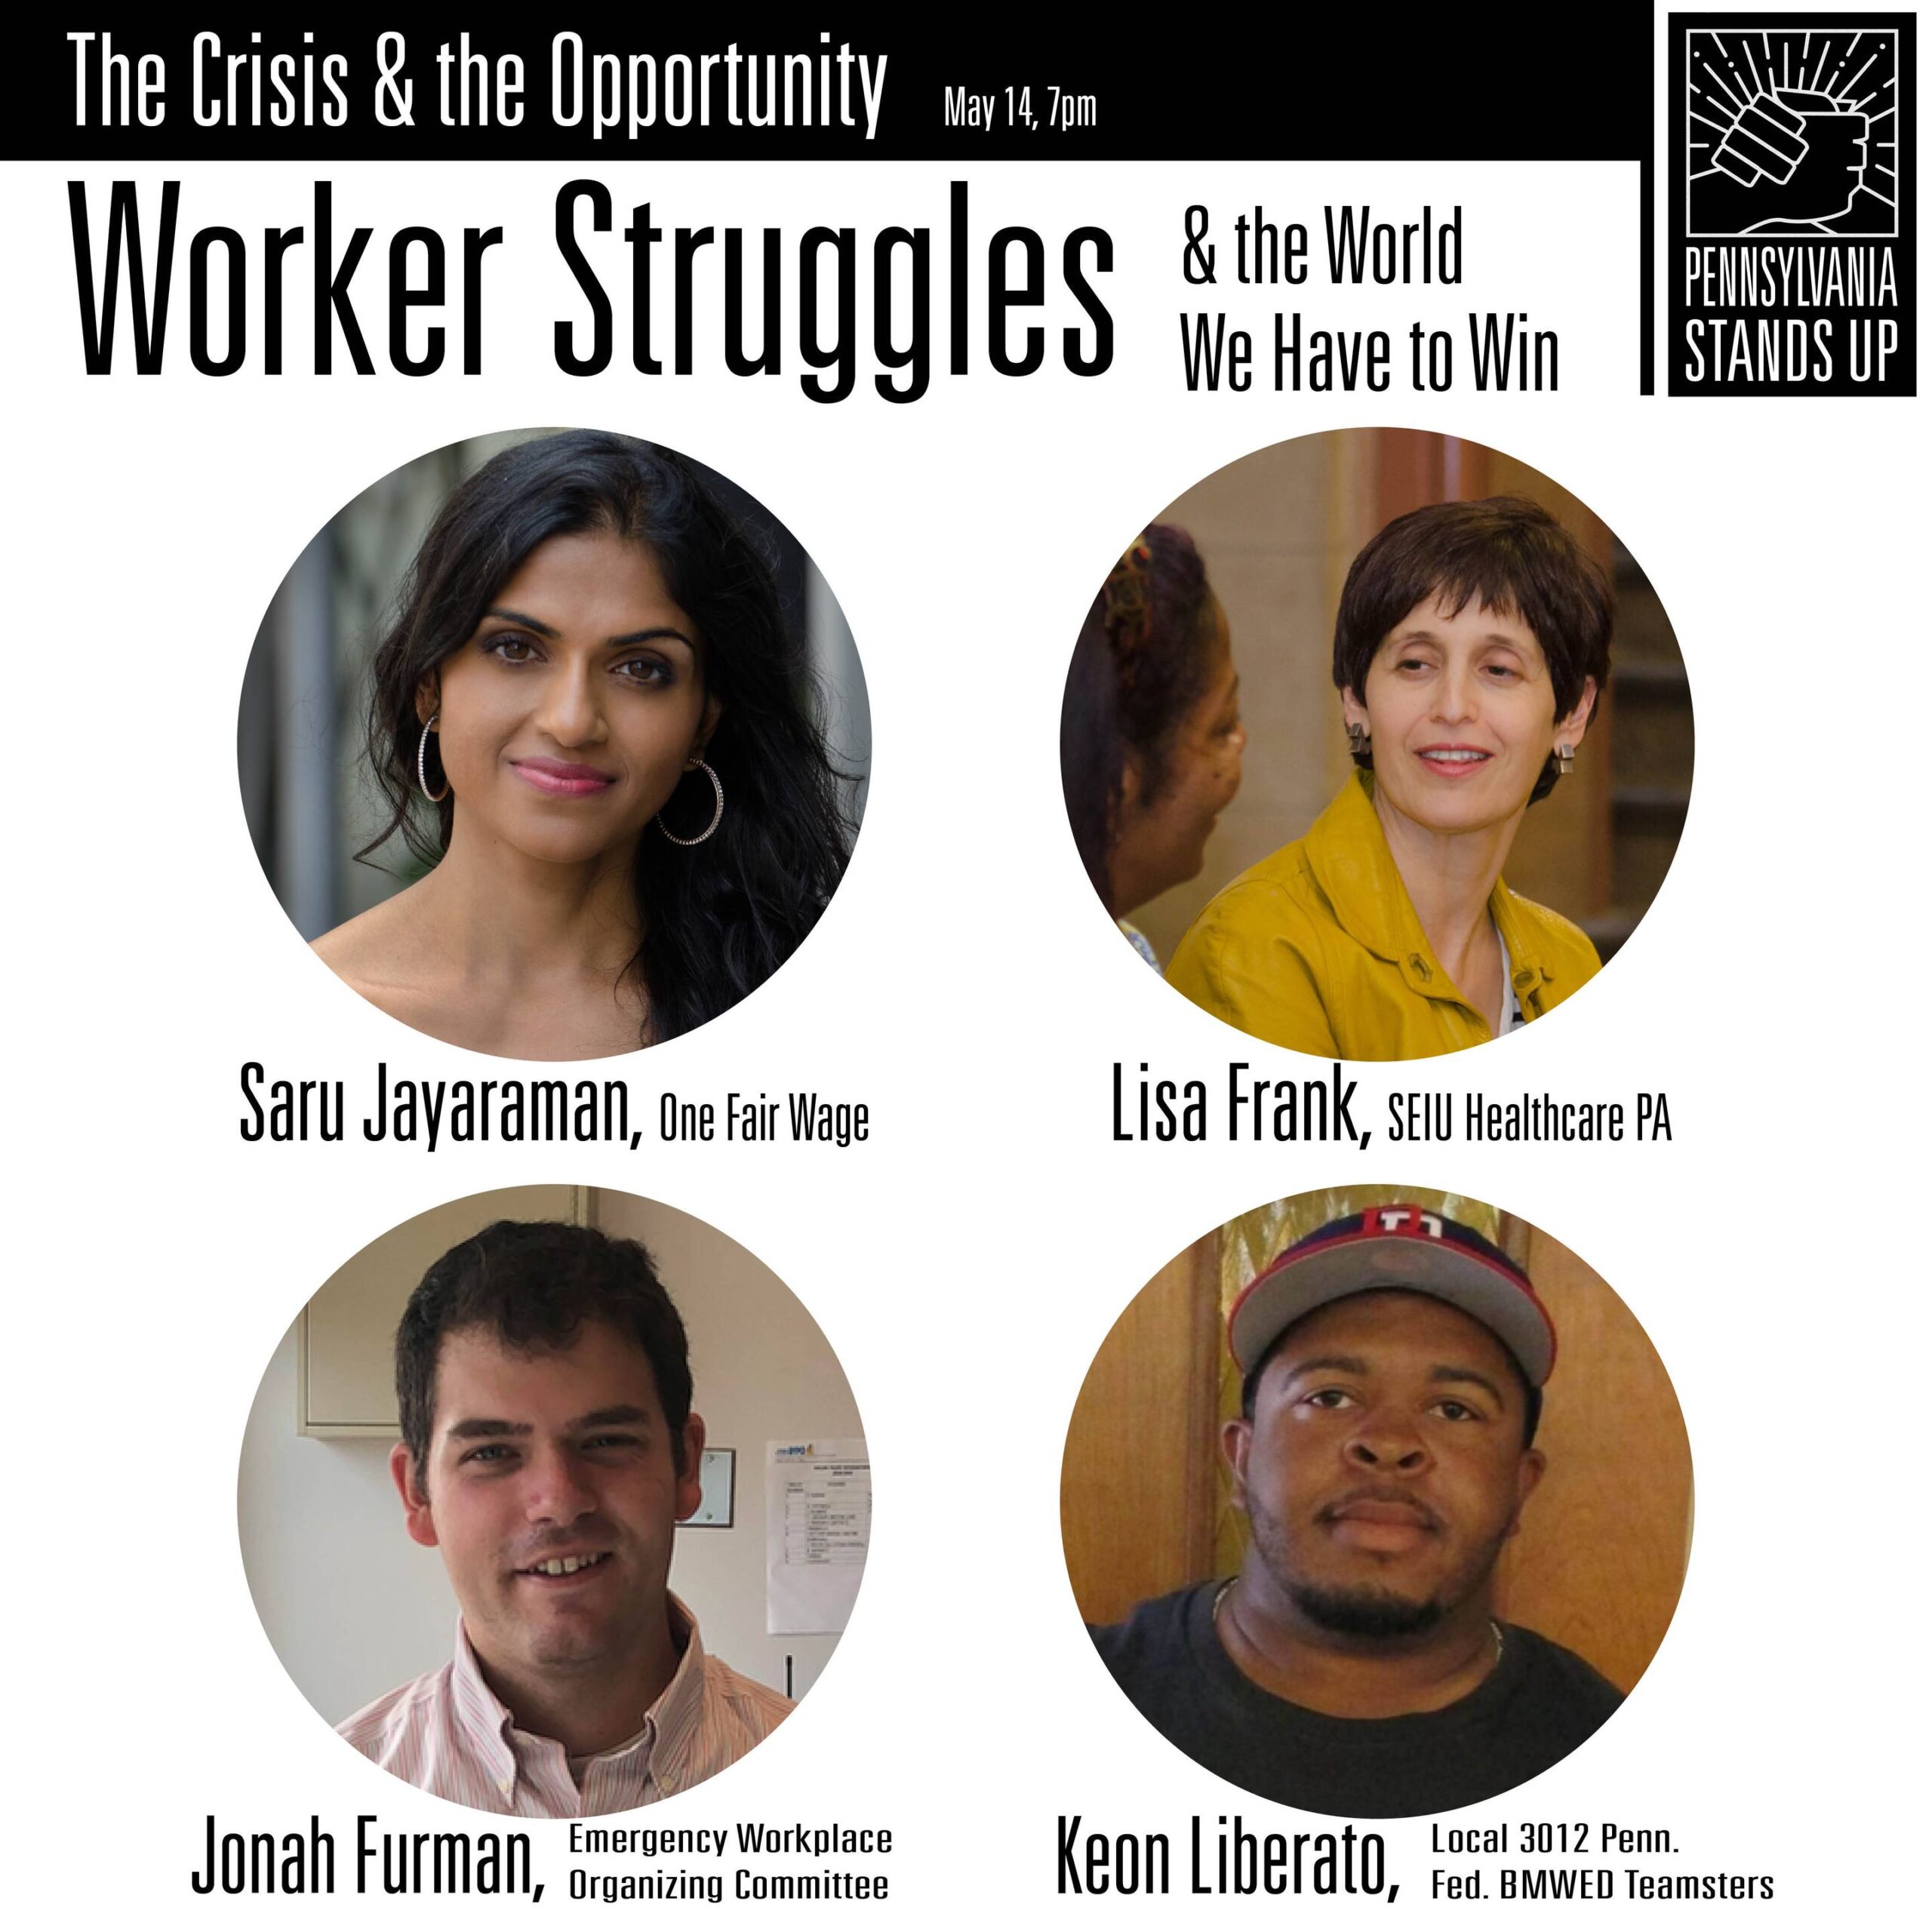 Worker Struggles & Covid: The Crisis & the Opportunity